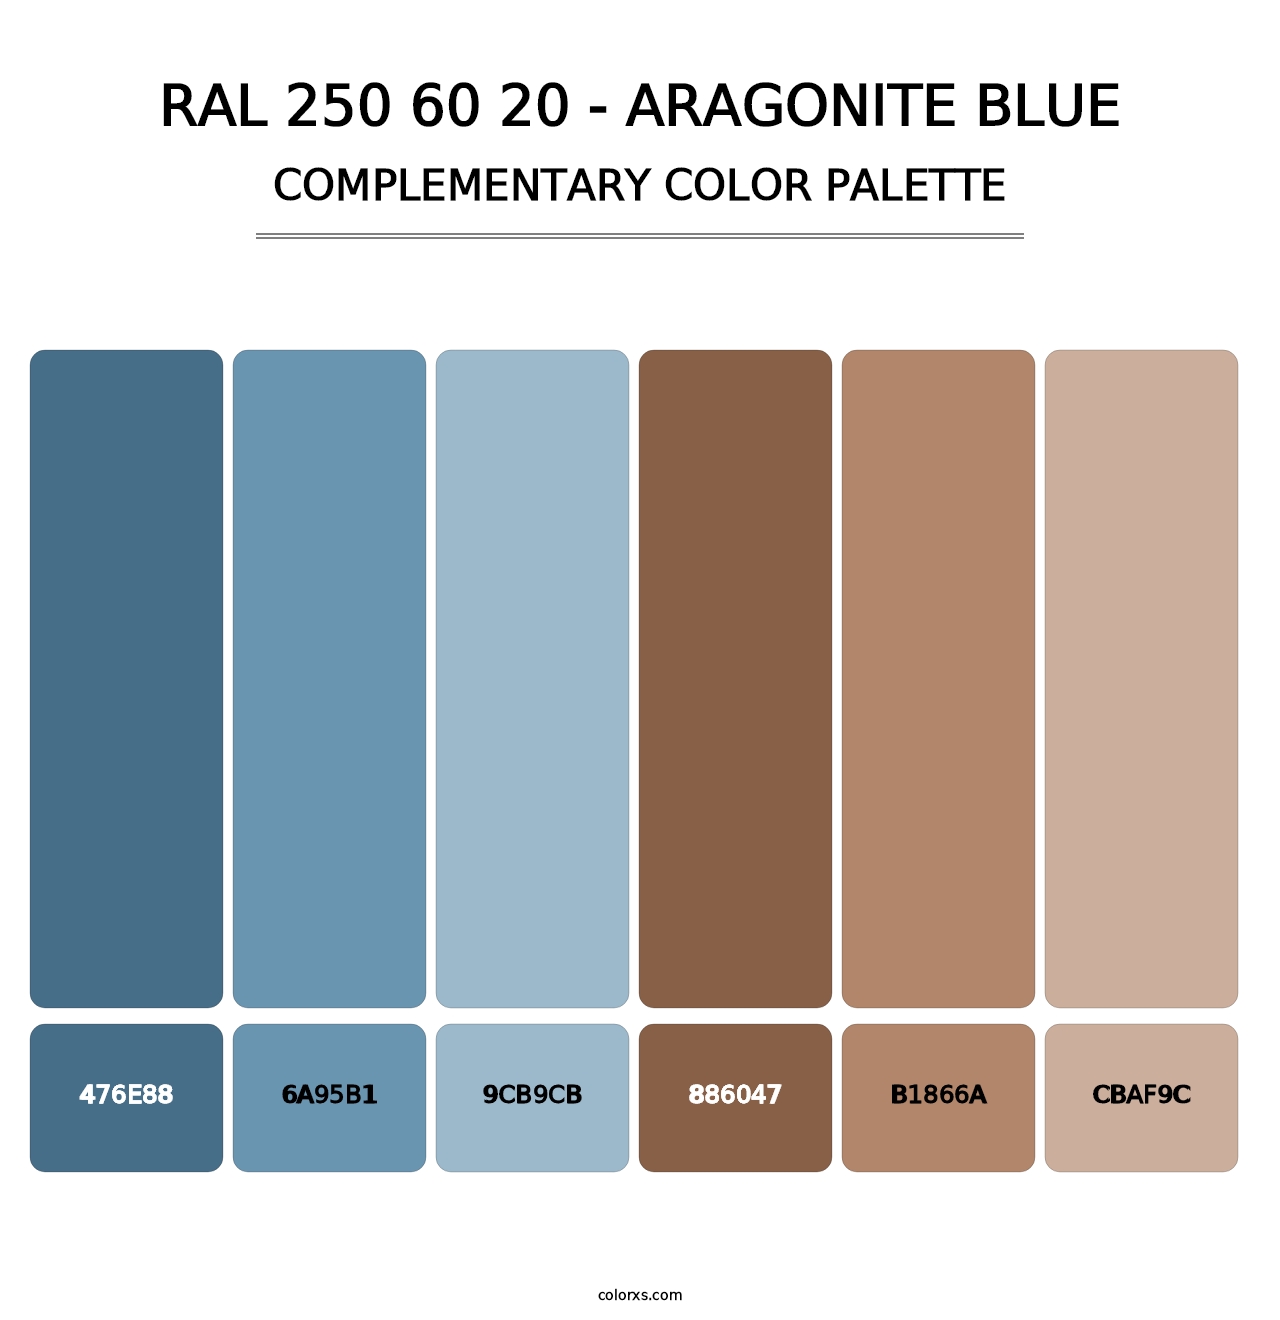 RAL 250 60 20 - Aragonite Blue - Complementary Color Palette